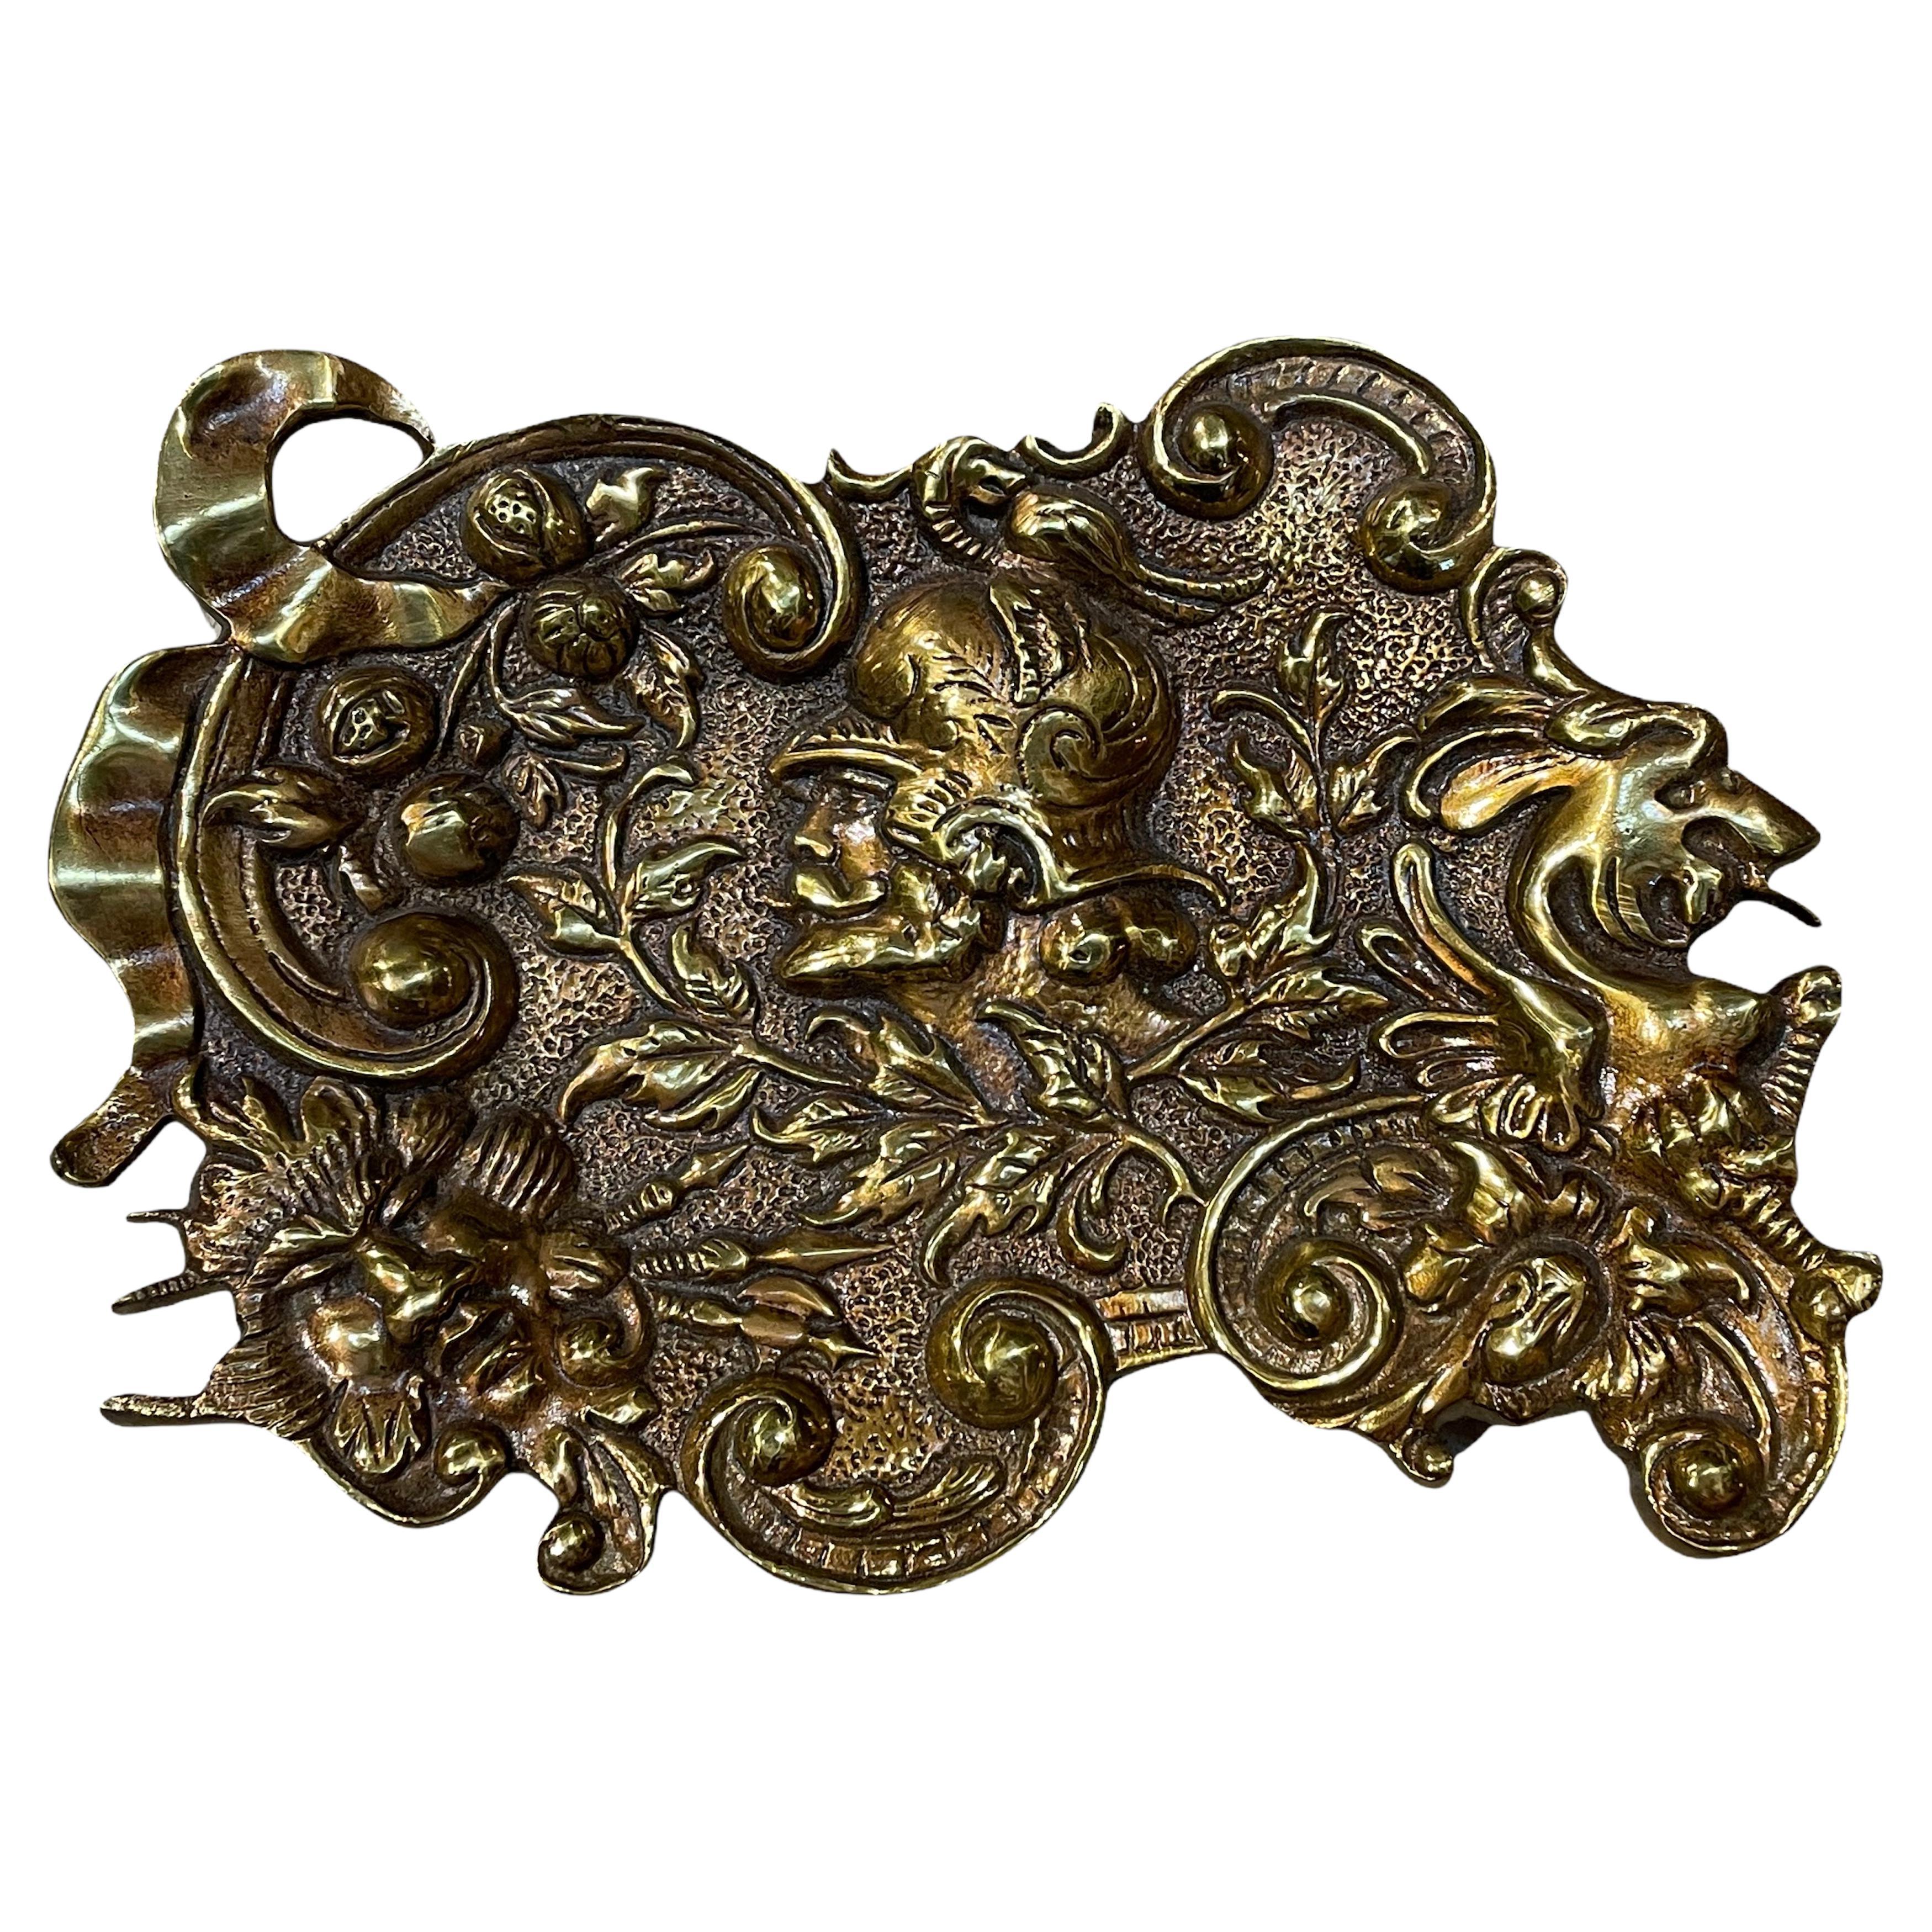 Bronze Rococo Style Ring Dish or Pen Rest